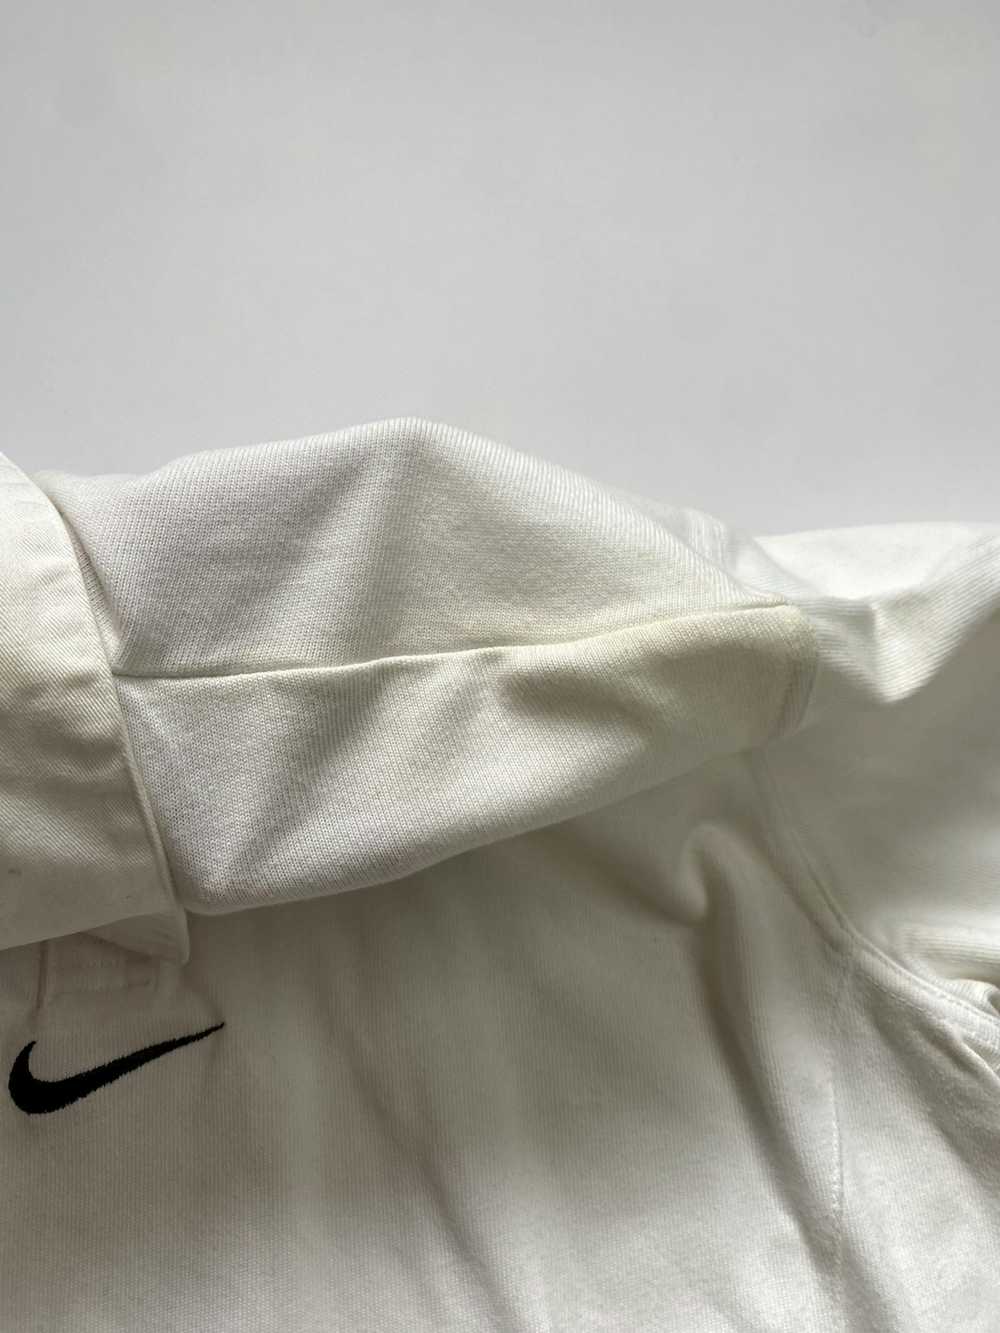 England Rugby League × Nike × Vintage Nike Rugby … - image 10